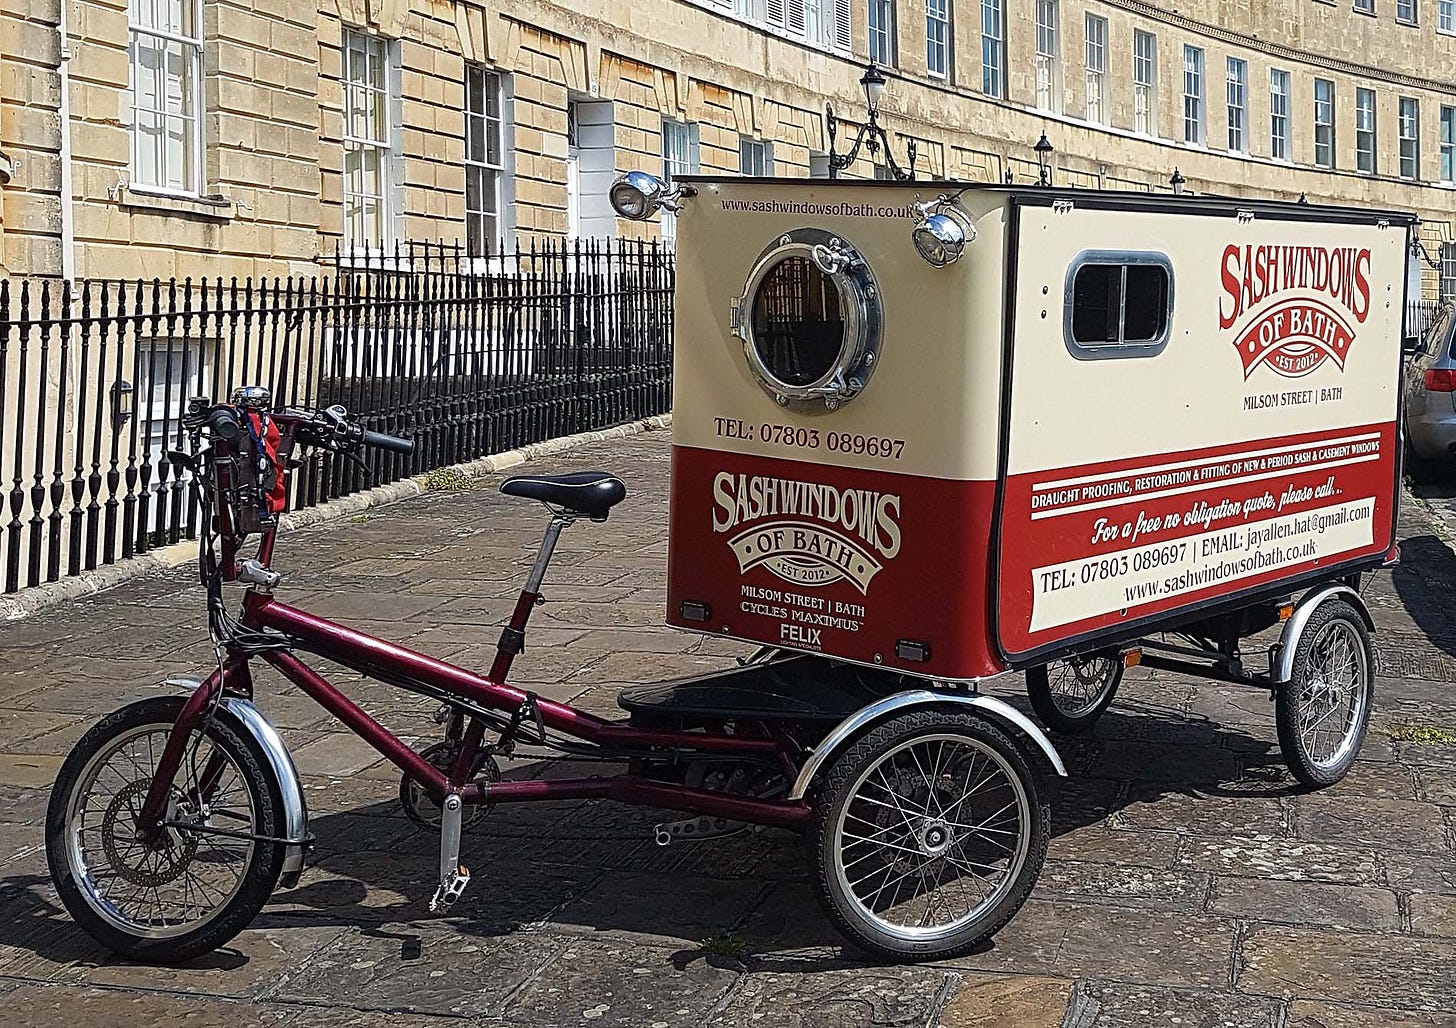 In front of a traditional bath row of town houses, a bicycle with a long covered trailer is parked. On the side of the trailer is an advert for the company